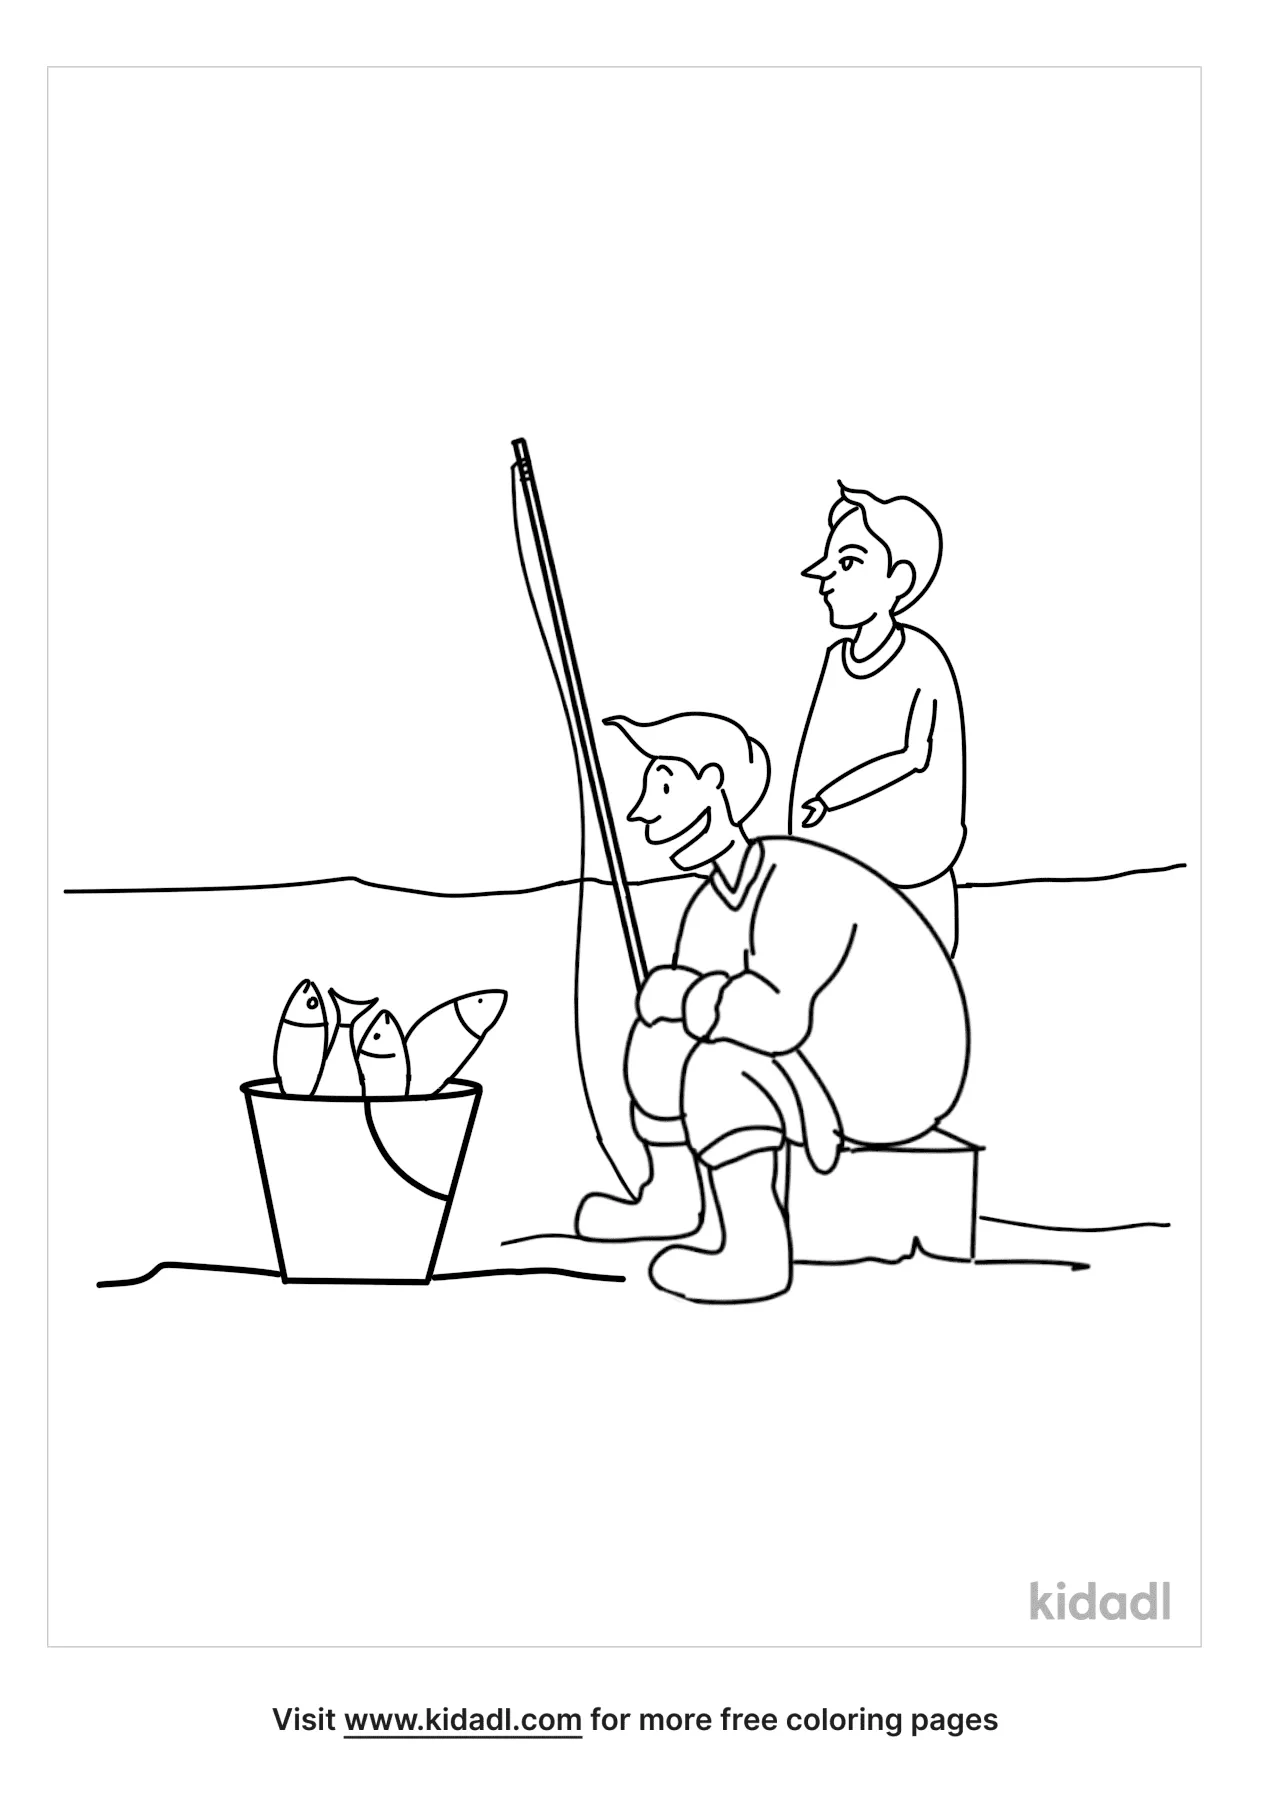 41+ fresh collection Fishers Of Men Coloring Page - Free Bible Coloring